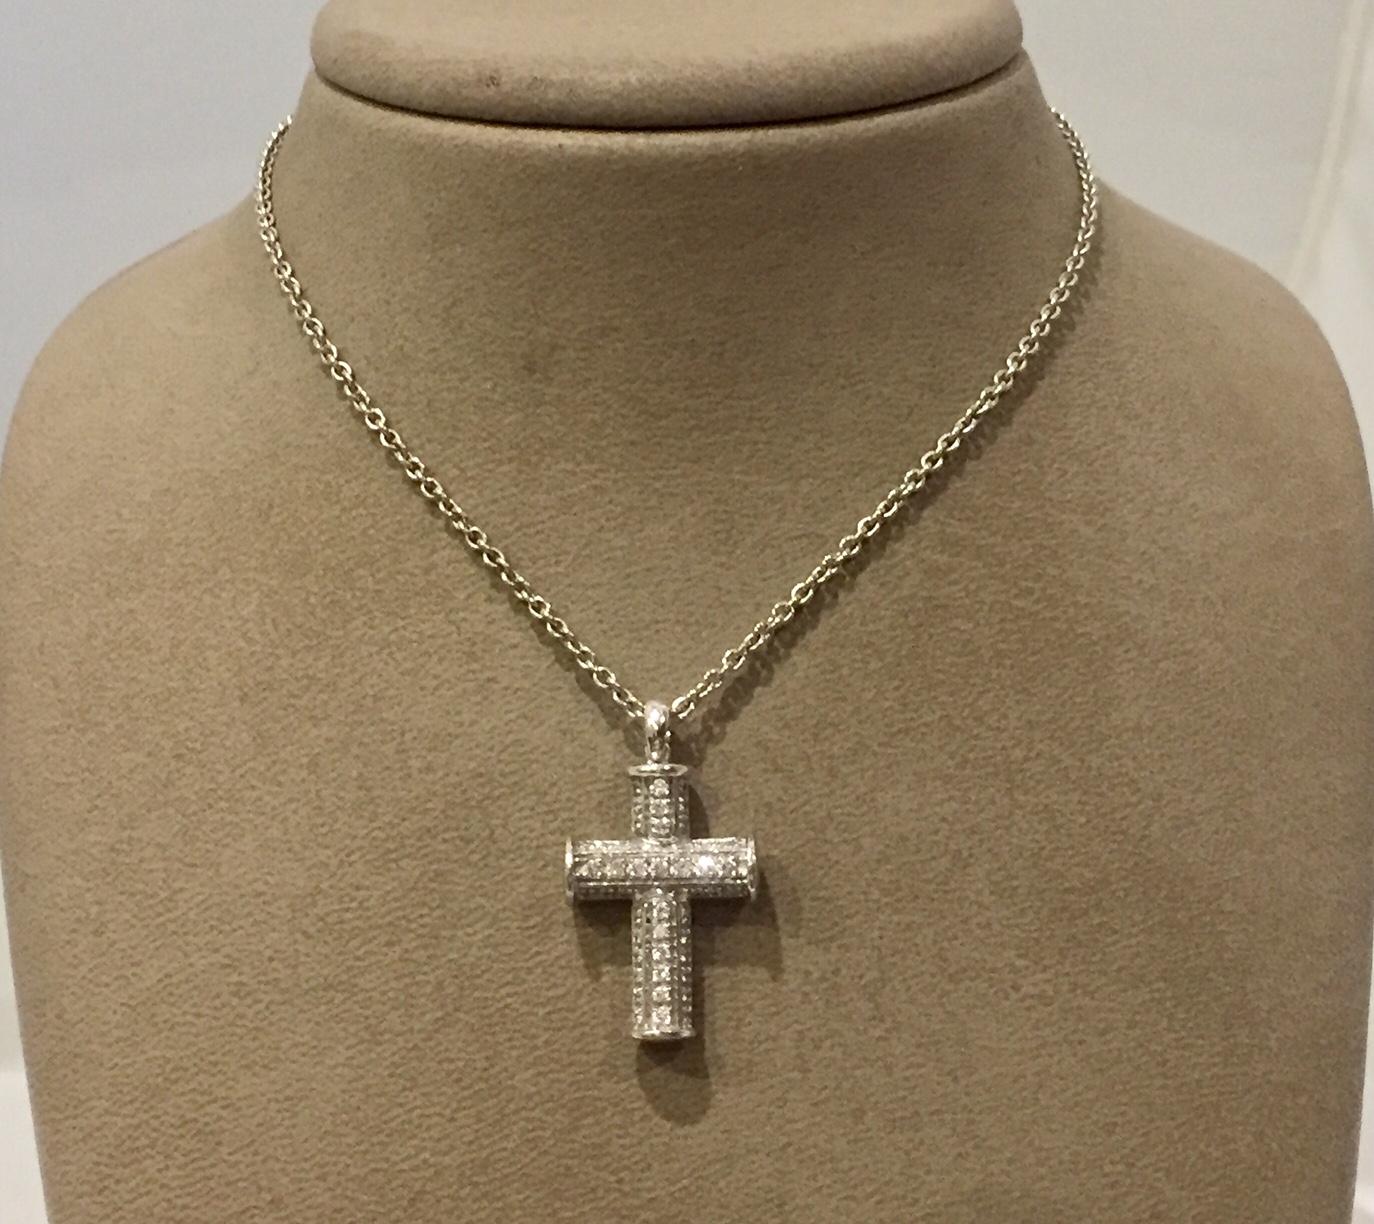 The pendant features a latin cross of cylindrical design, with three rows of brilliant-cut diamonds, in 18k white gold. Signed Bulgari. Comes with original chain, certificate and box. 
Original retail price was 5500 US $!
46 Brilliant cut Diamonds